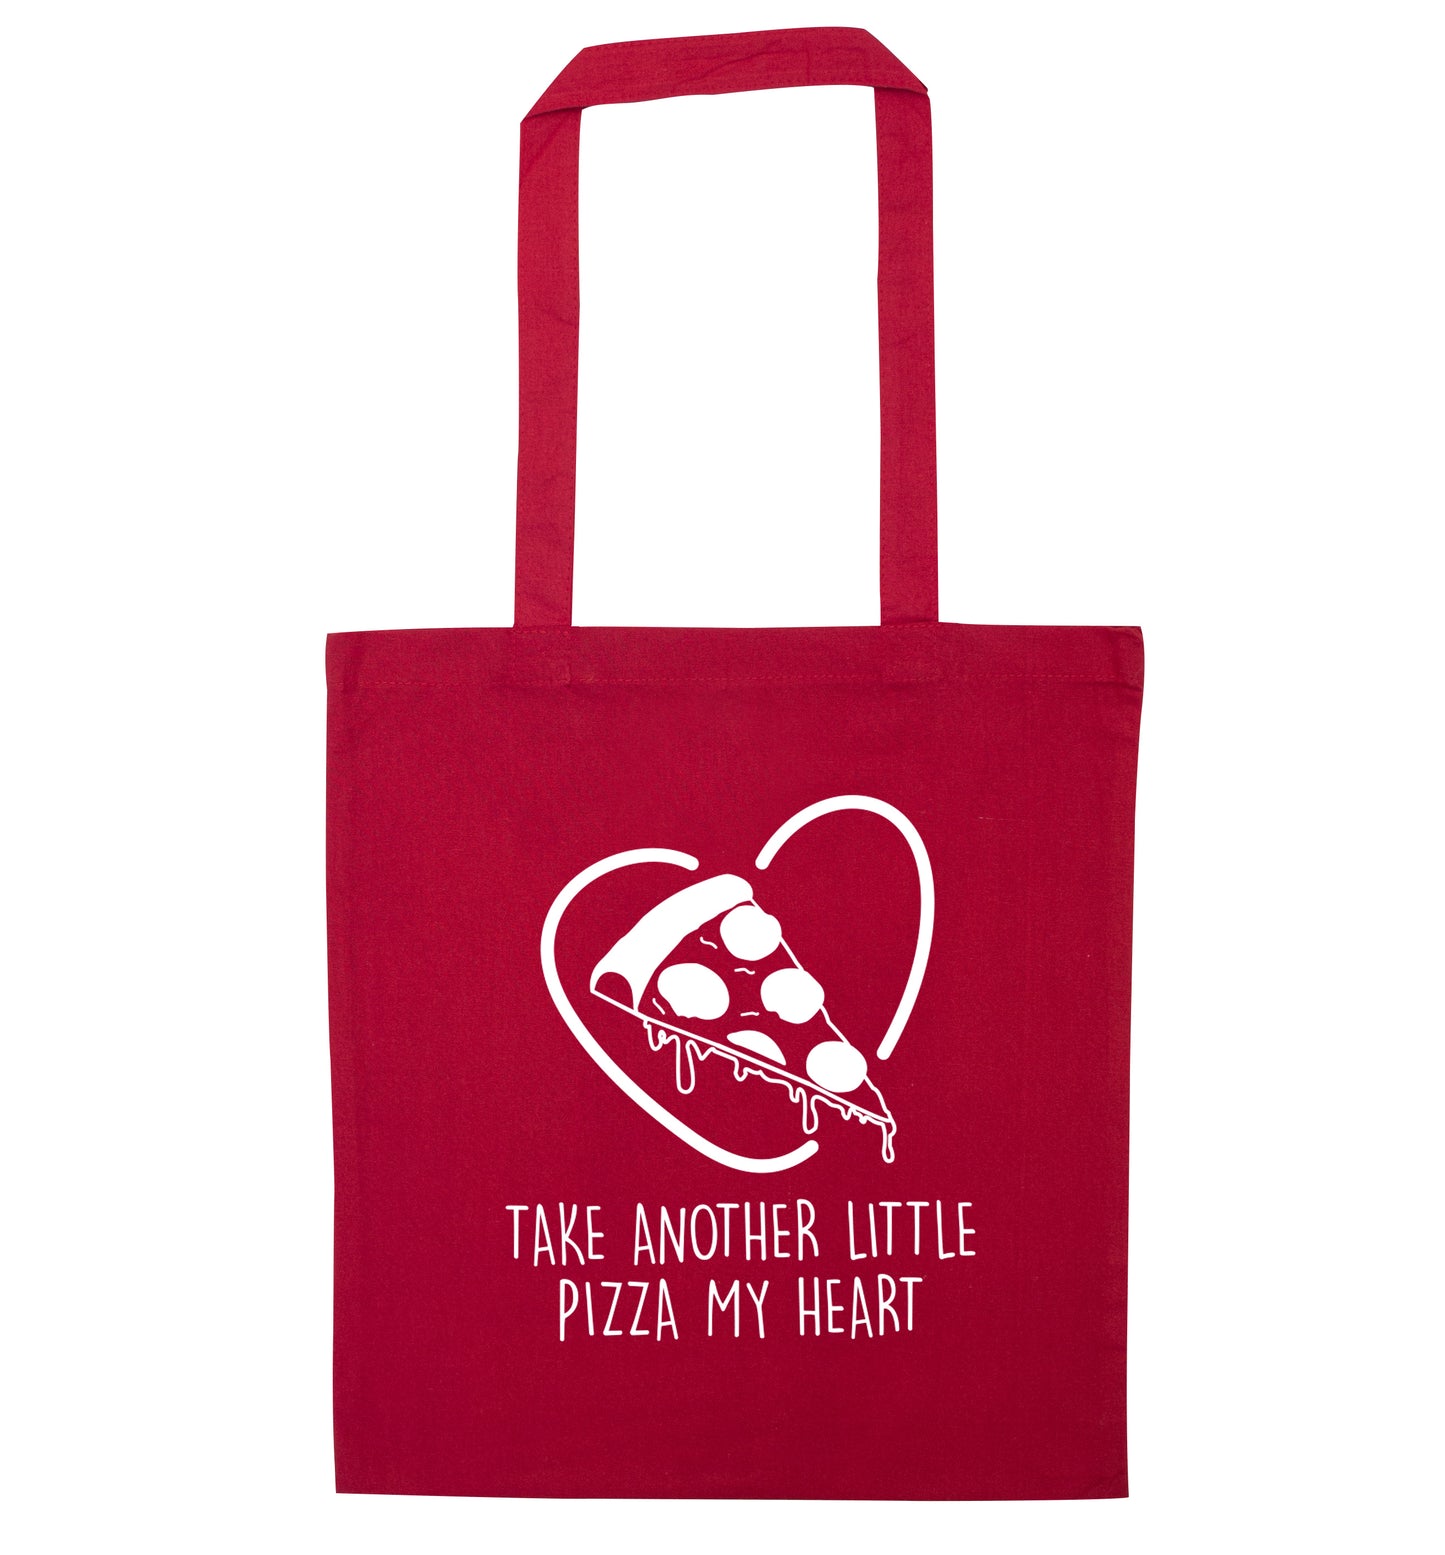 Take another little pizza my heart red tote bag